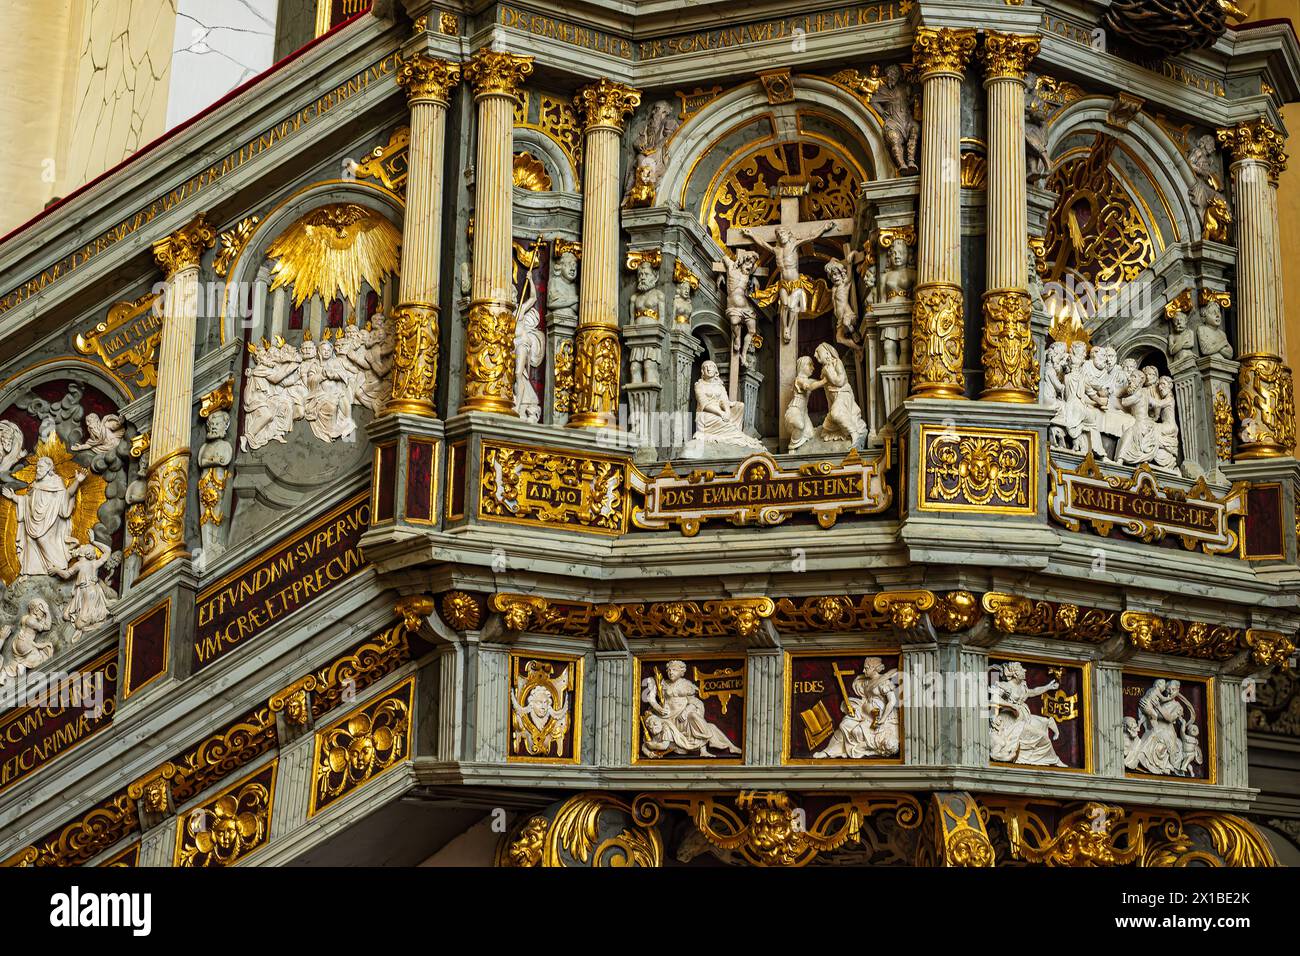 Detail of the pulpit from 1574, interior view of St Mary's Church in the historic Old Town of Rostock, Mecklenburg-Western Pomerania, Germany. Stock Photo